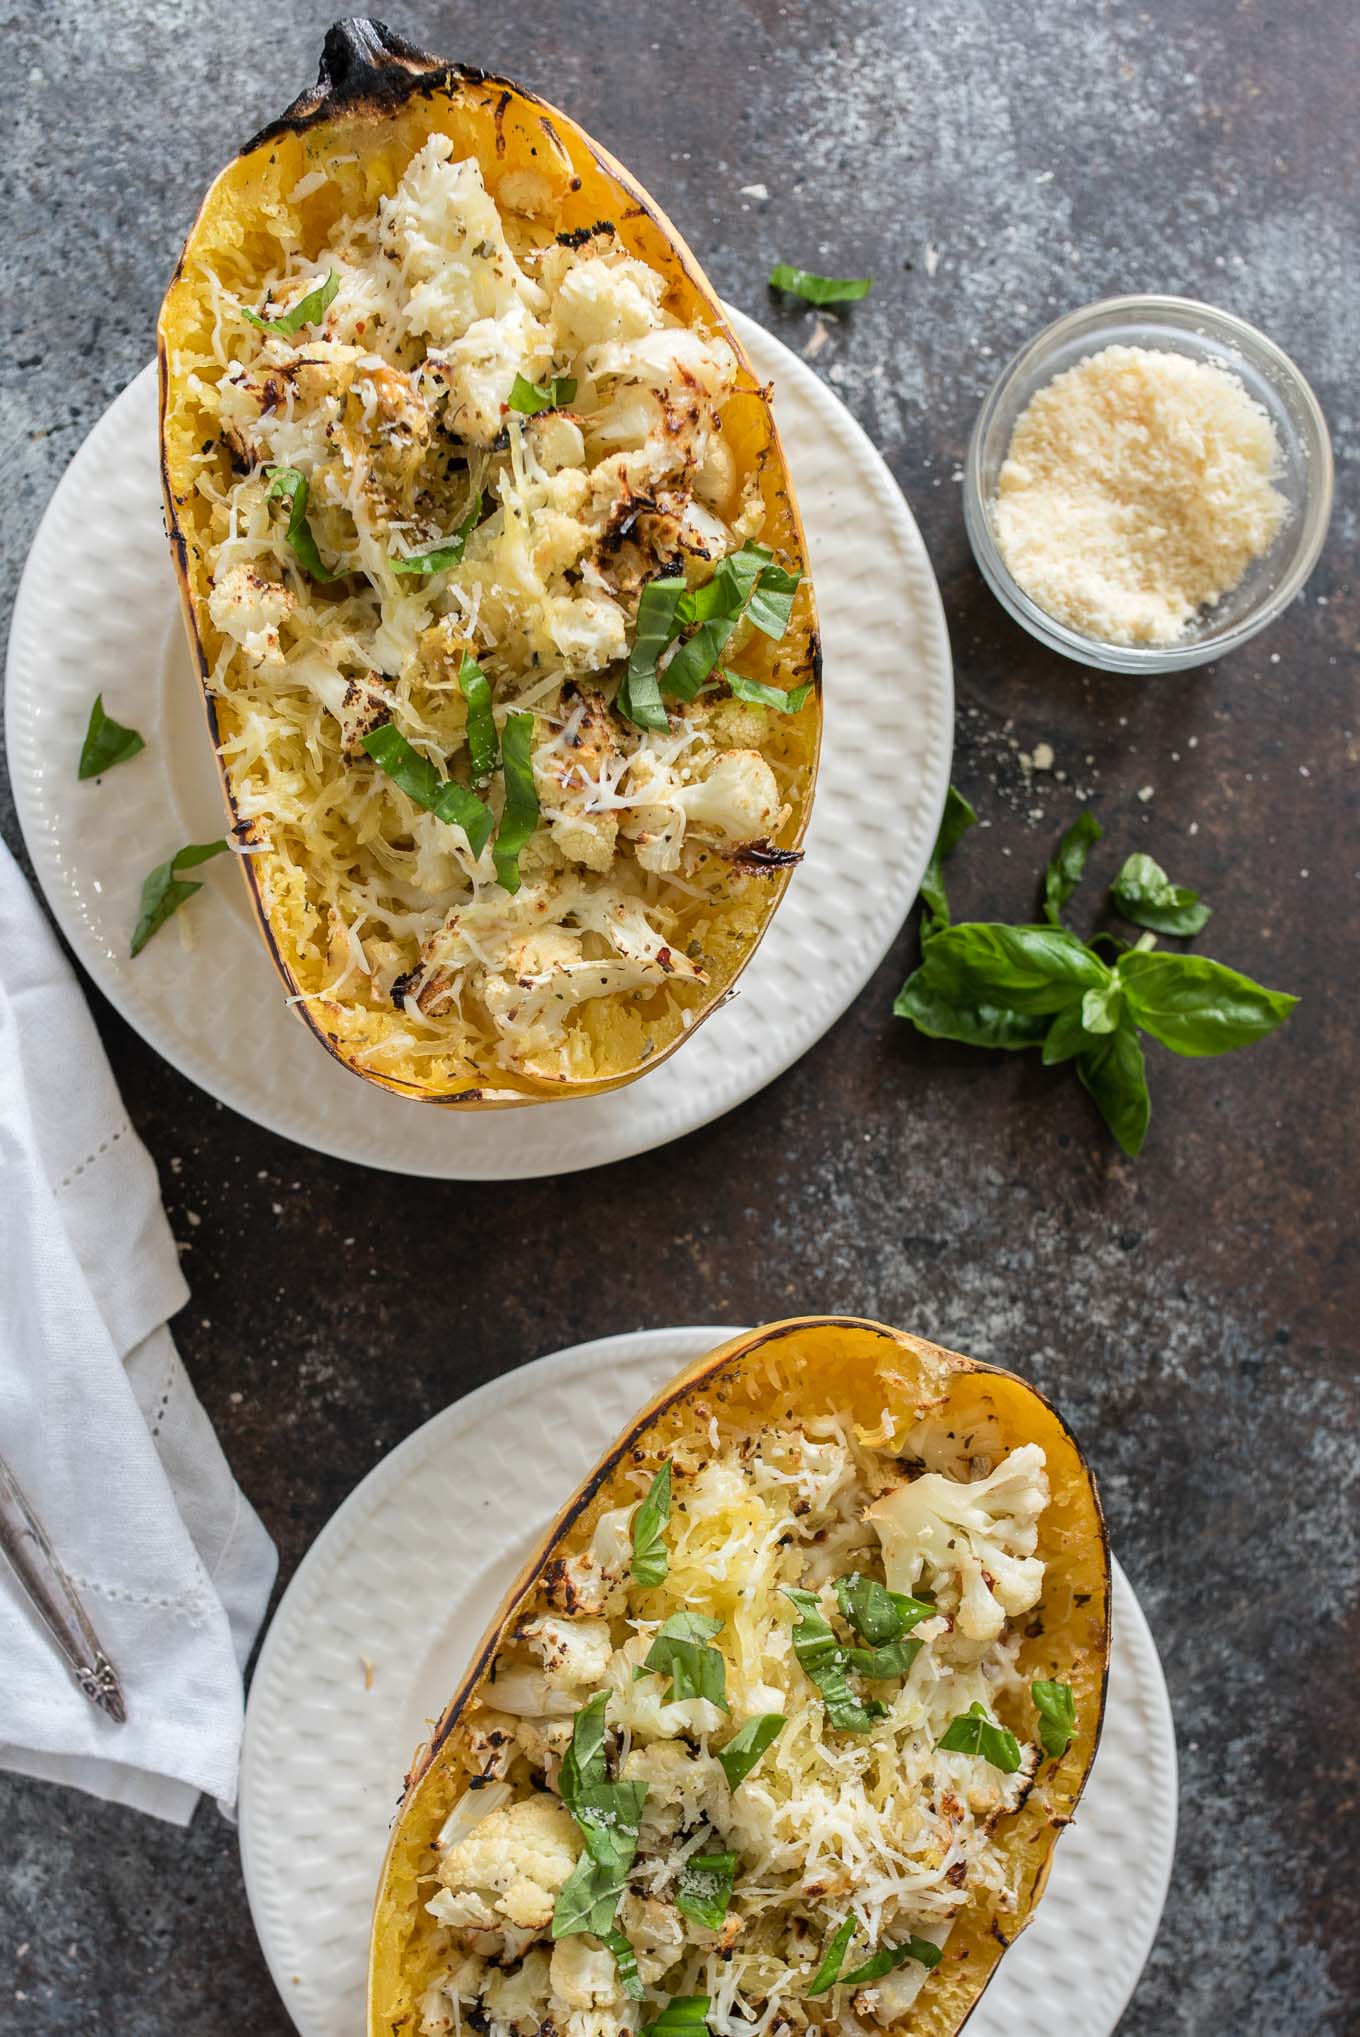 Cheesy Roasted Cauliflower Spaghetti Squash Boats make a great vegetarian meal or side dish, packed with garlicky cauliflower and cheesy goodness.